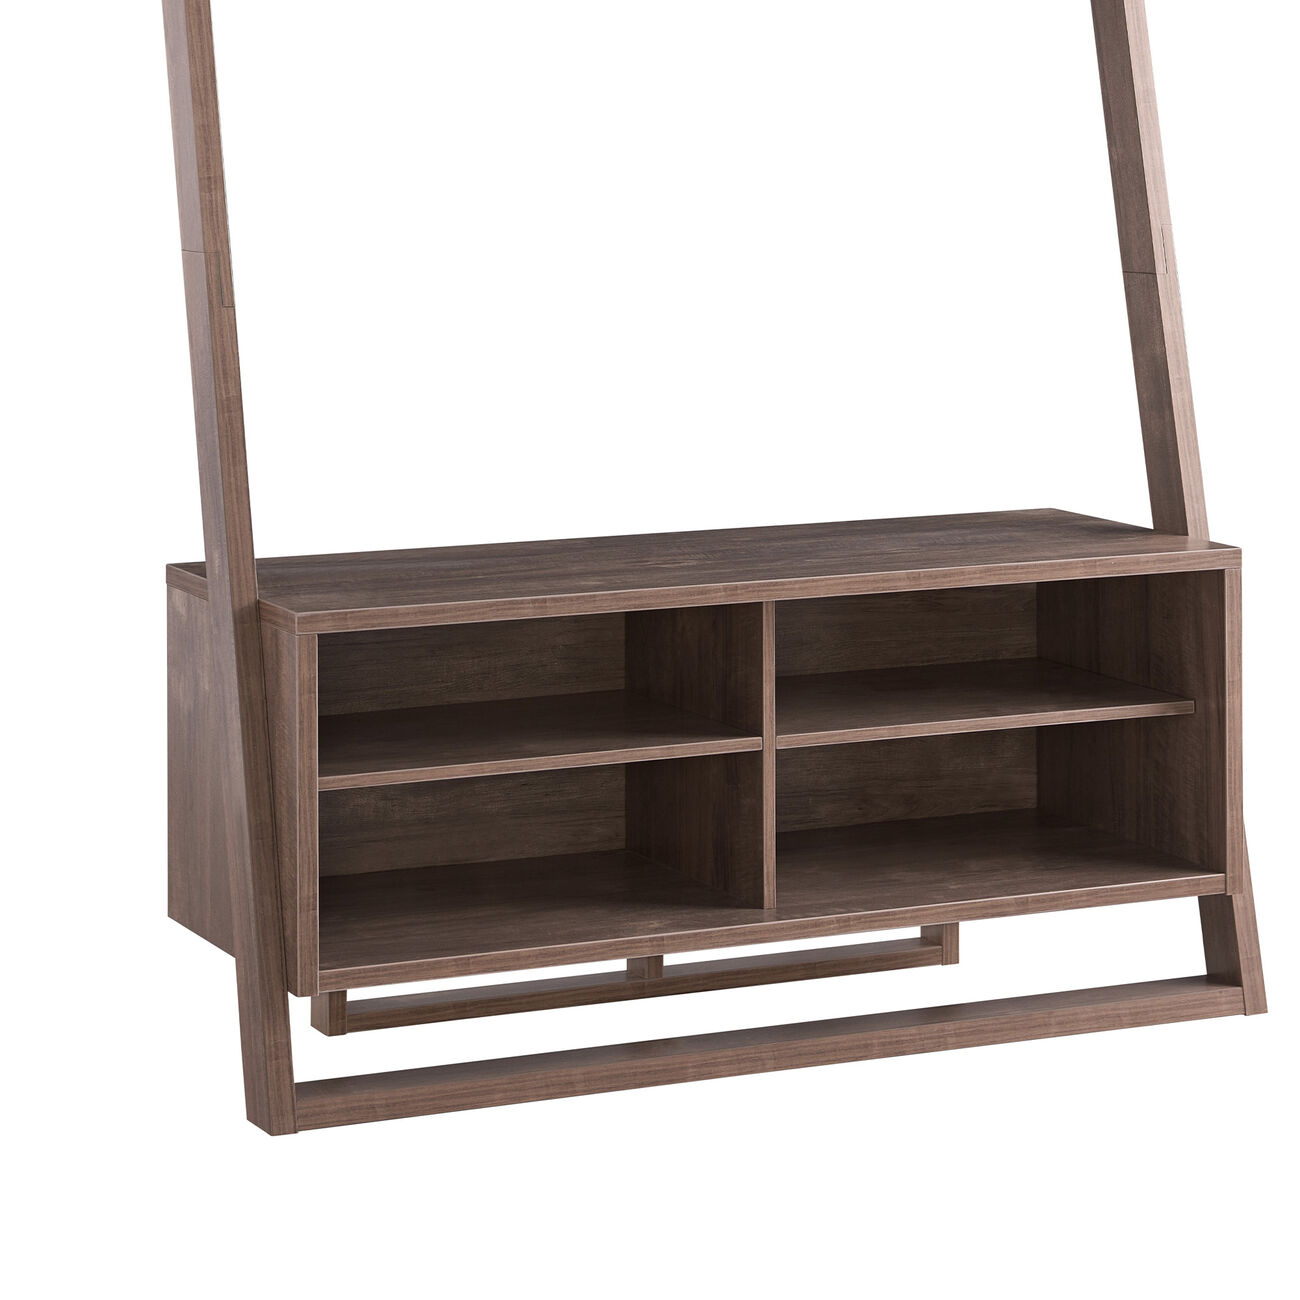 2 Tier Transitional Style Wooden TV Stand with Display Unit, Brown